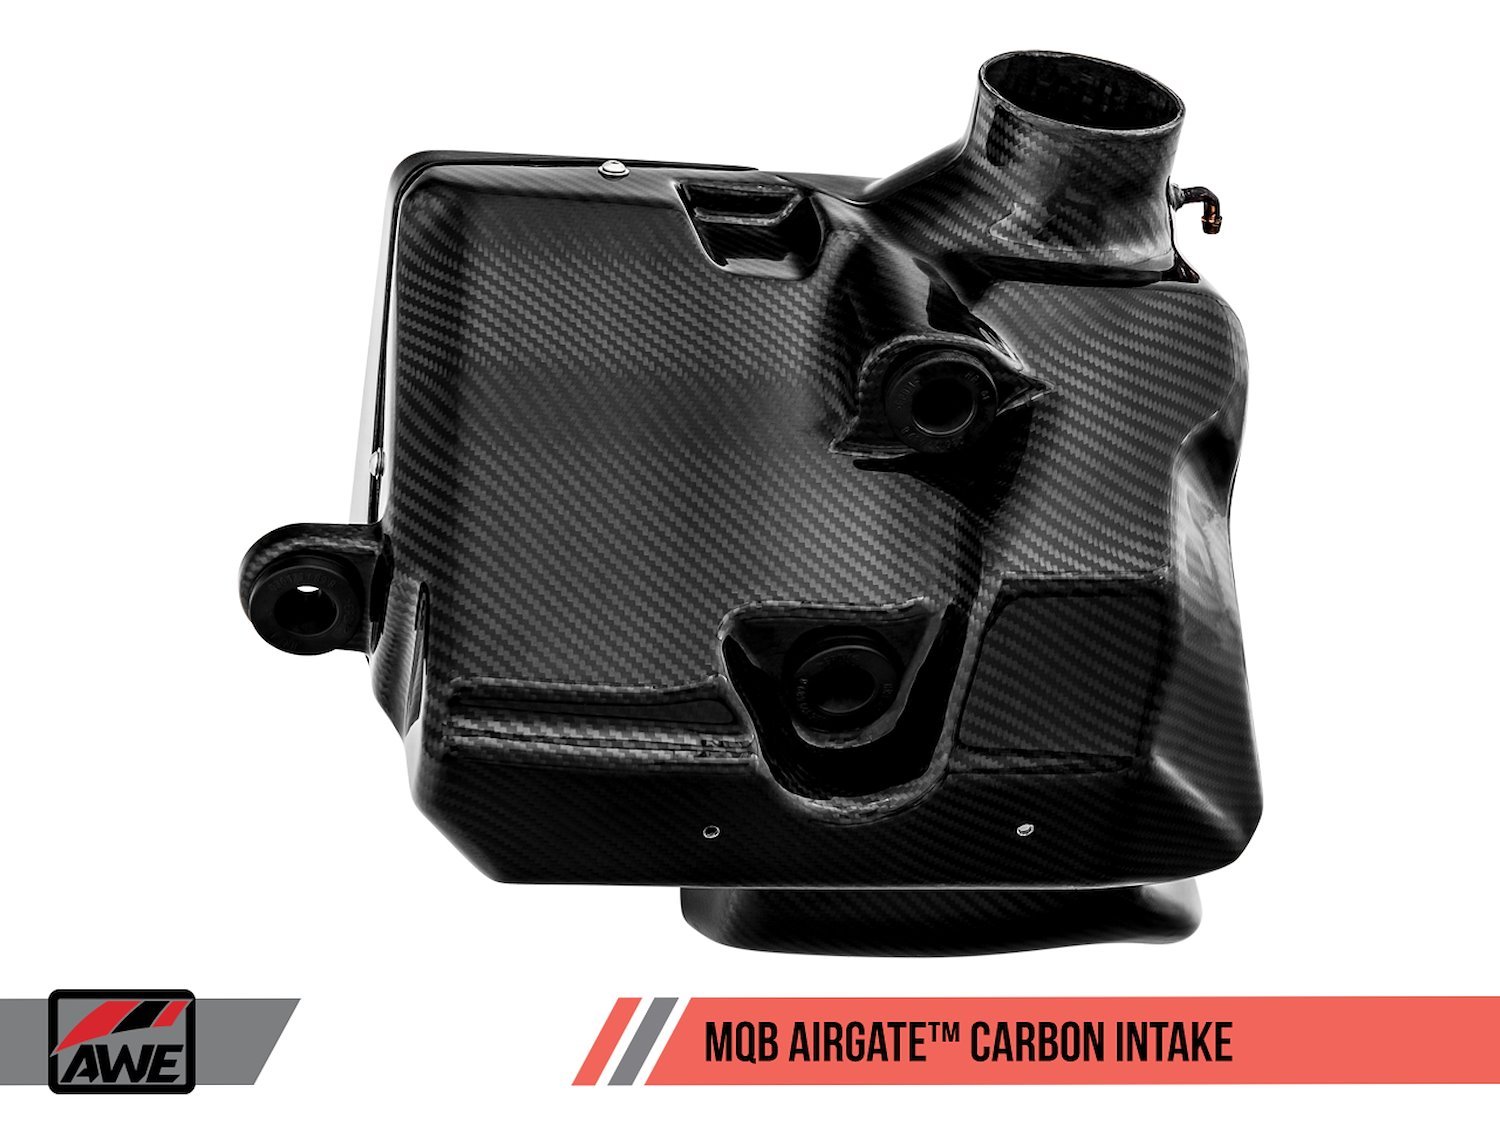 AirGate Carbon Intake for Audi / VW MQB (1.8T / 2.0T) - Without Lid